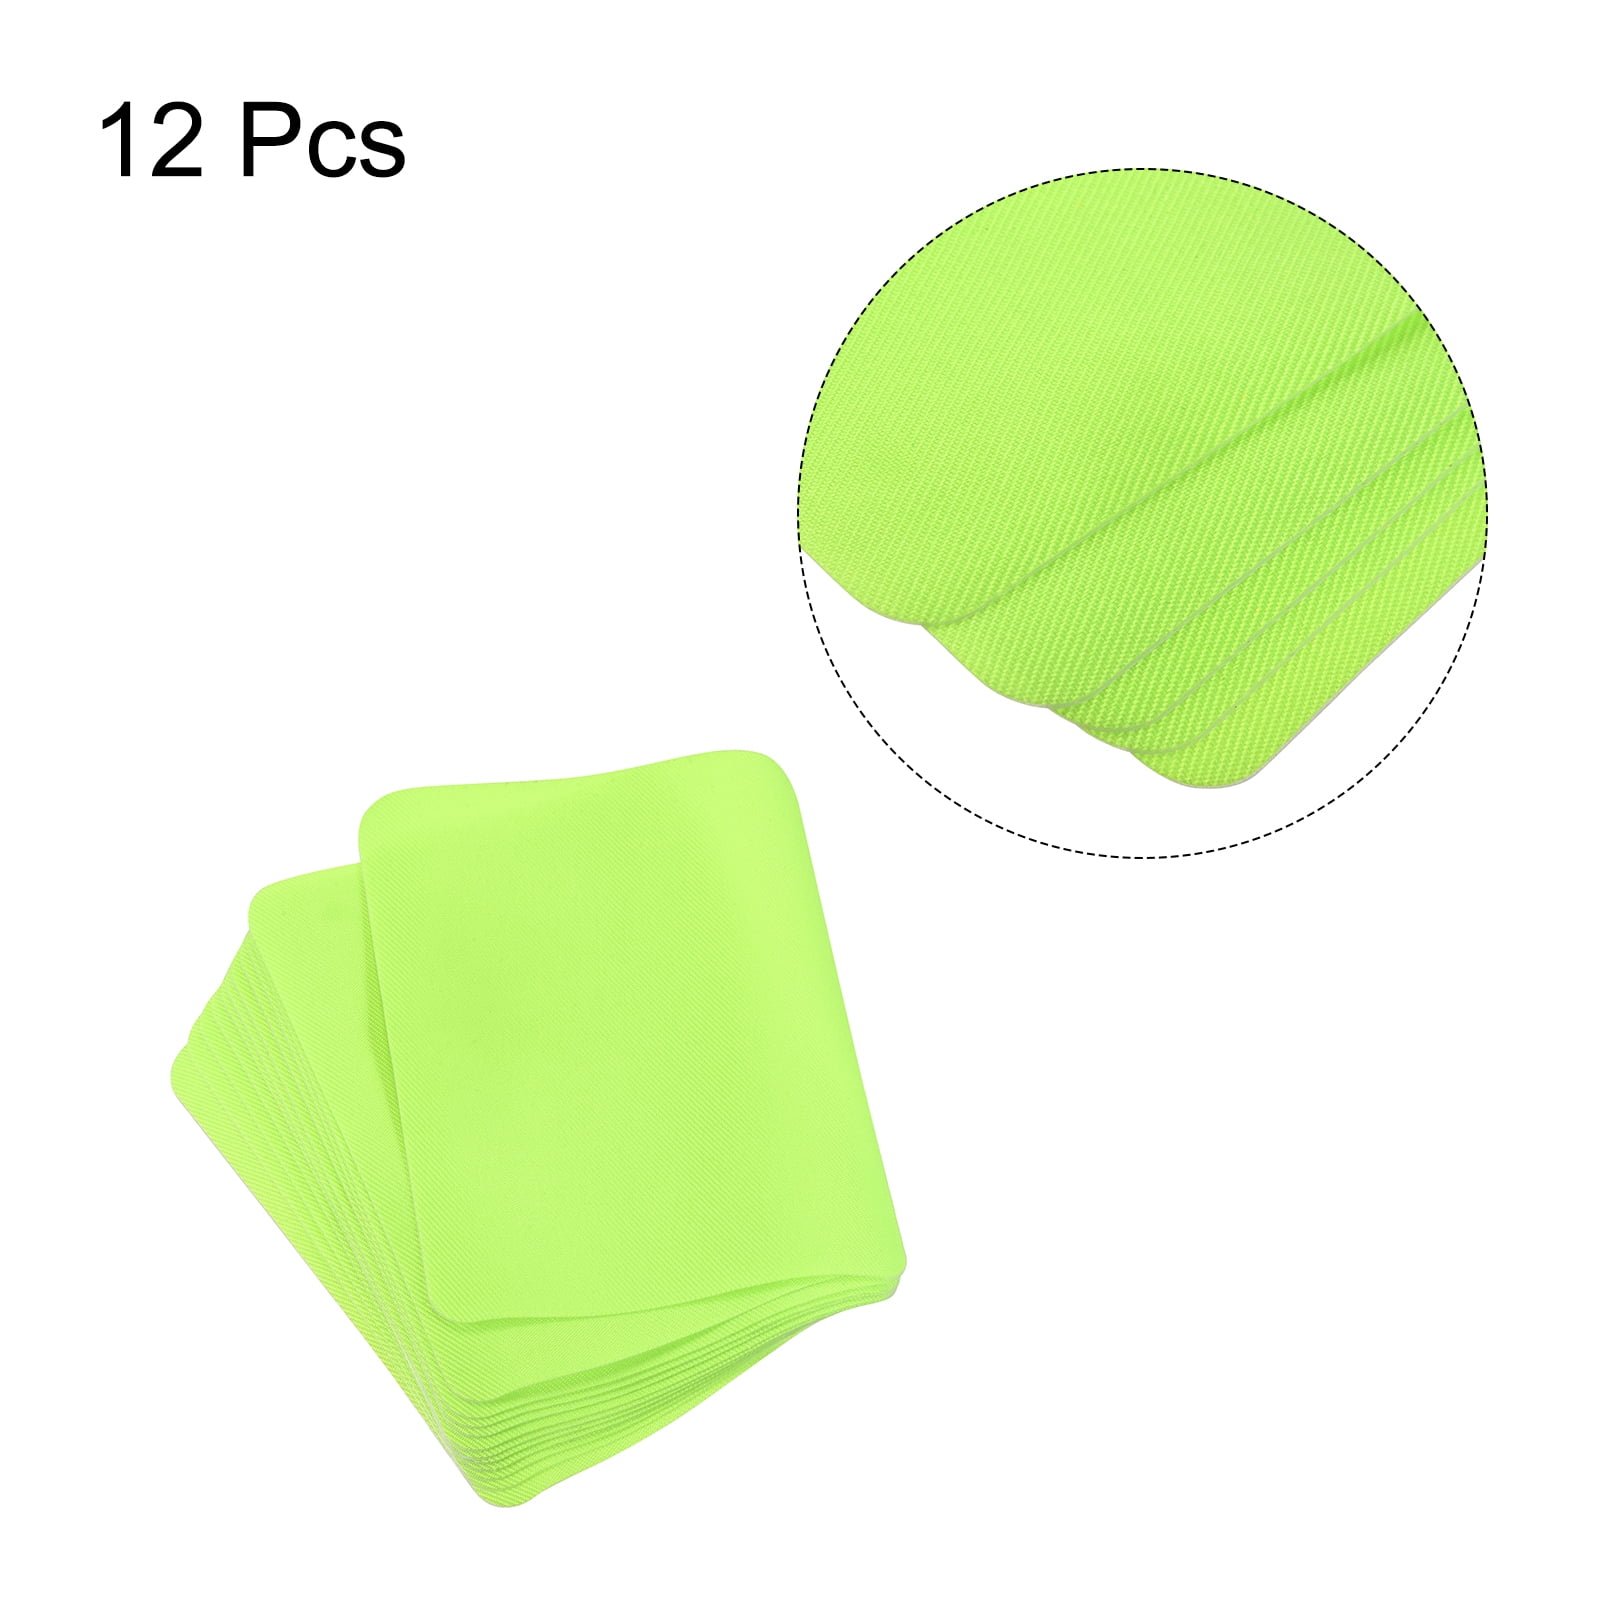  Harsgs 12PCS Fabric Iron on Patches Inside & Outside Strong  Glue 100% Cotton Repair Patch for Clothes Pants Mending and Decorating,  Army Green